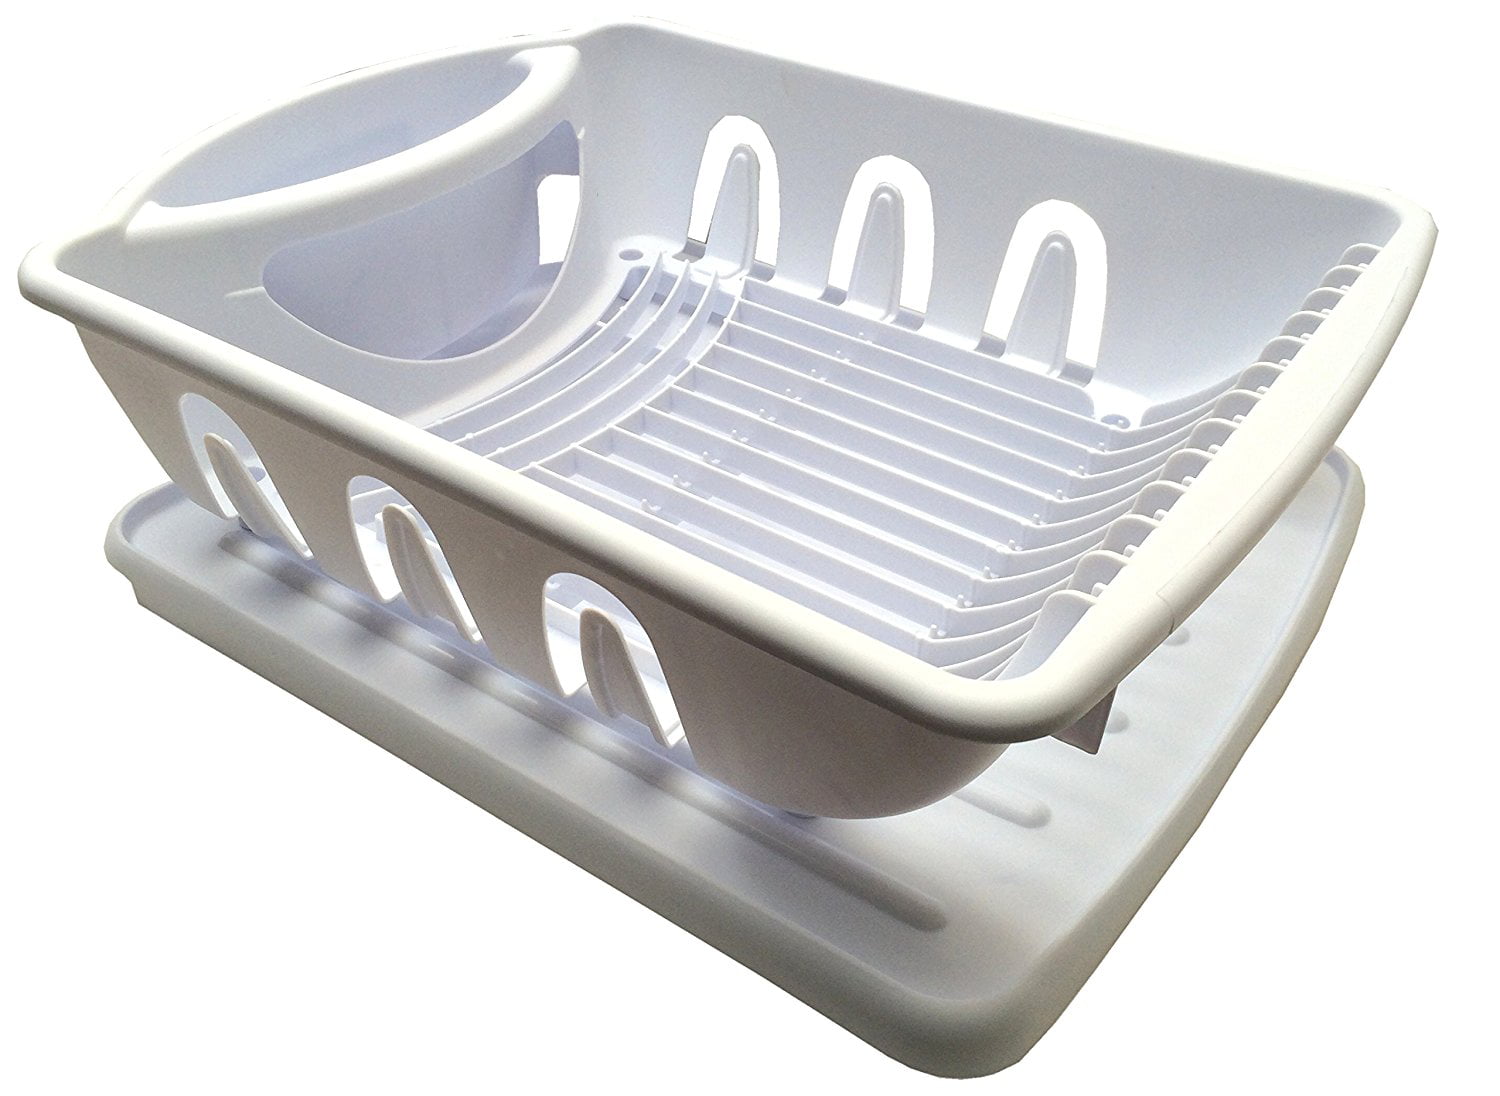 Sterilite Plastic Nesting Dish/Cutlery Drying Rack & Drainboard Tray For  Kitchen, White